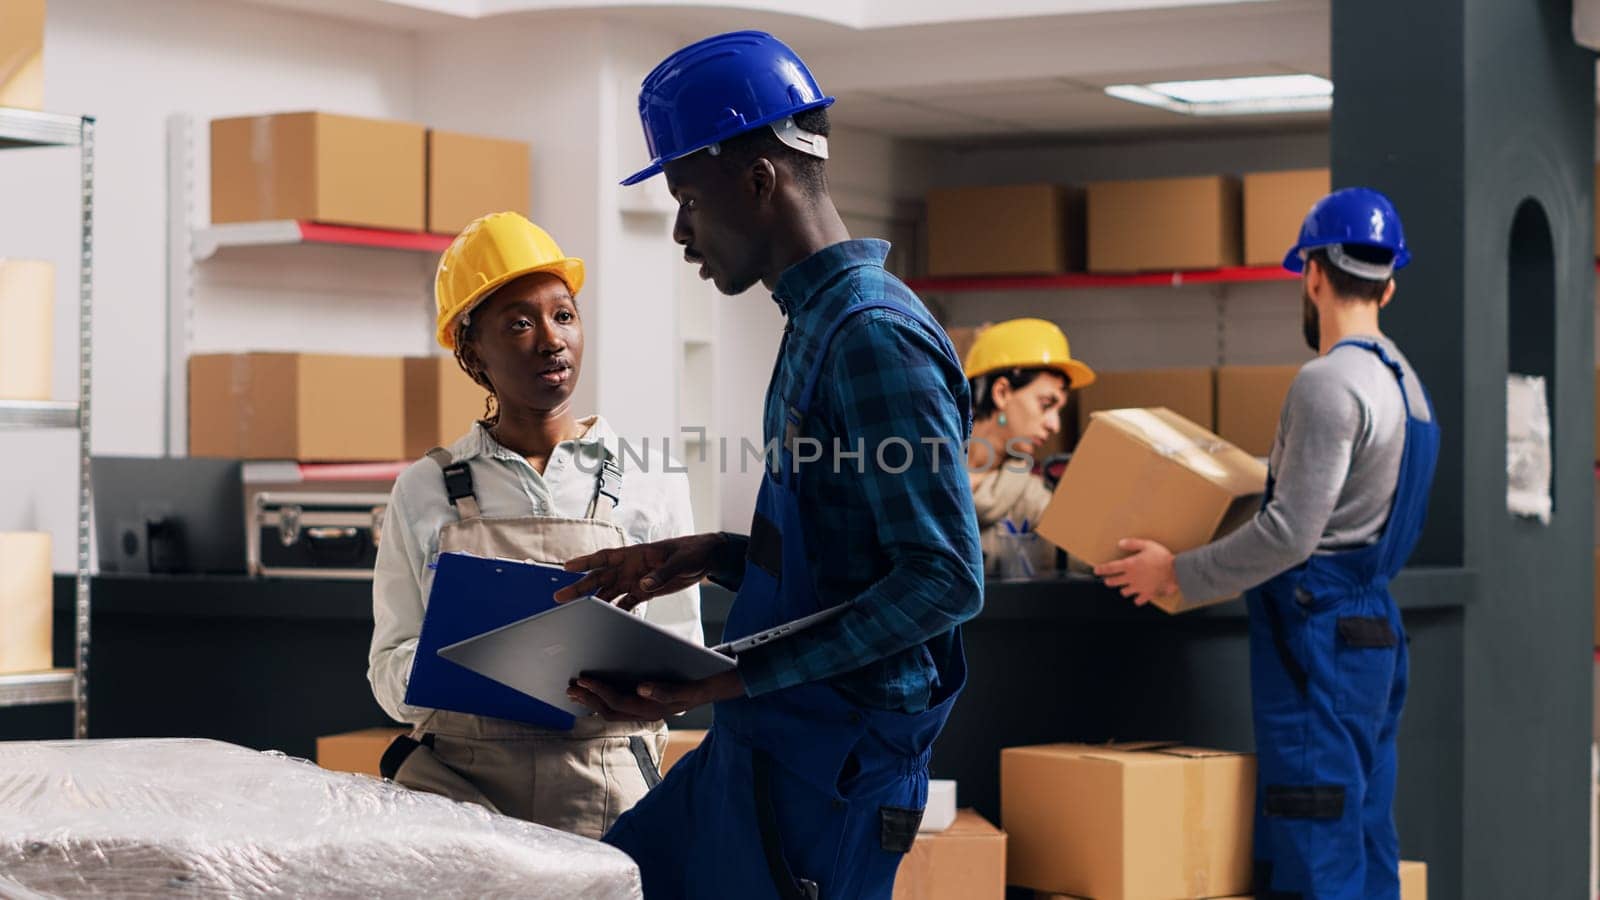 African american people doing quality control in warehouse, working with merchandise from depot shelves. Team of man and woman checking products for industrial service. Handheld shot.